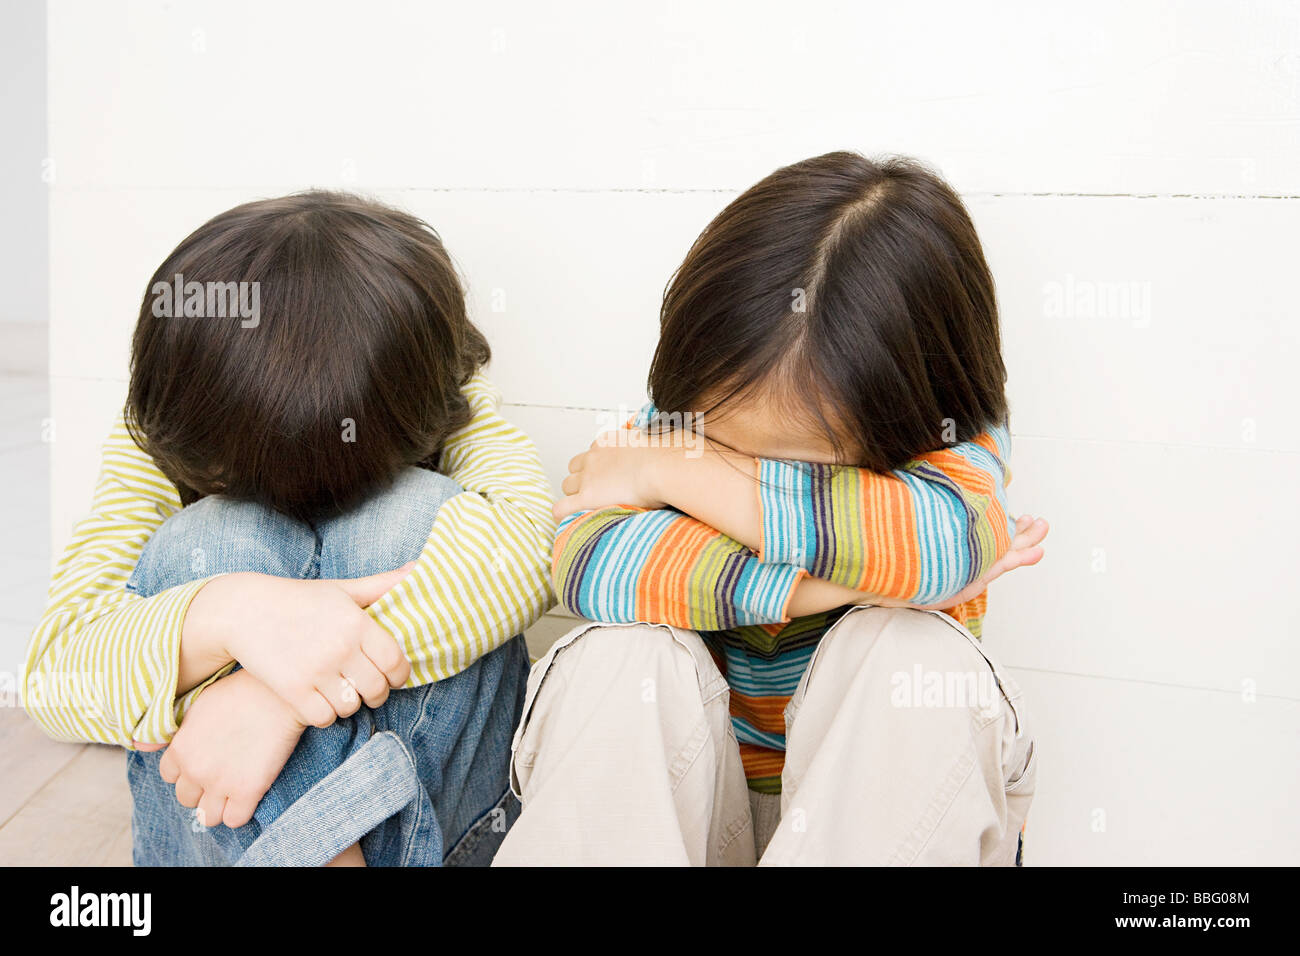 Boys covering their faces Stock Photo